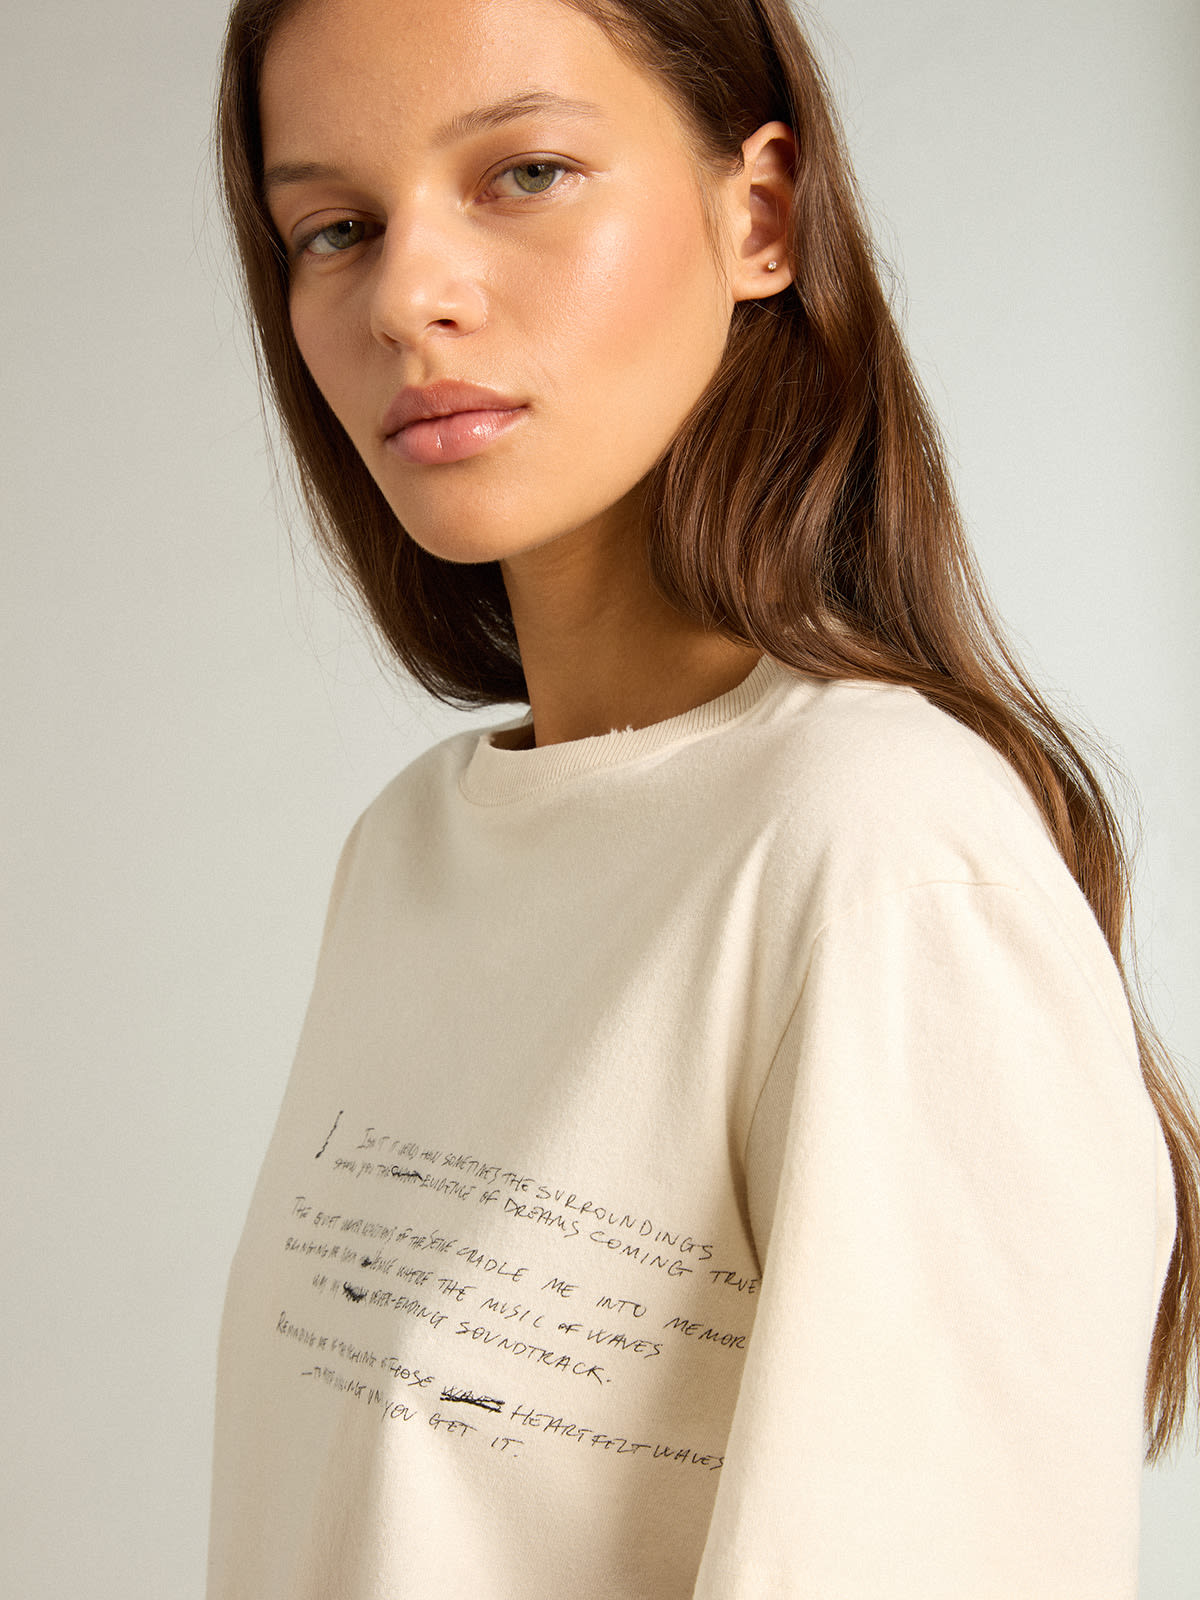 Golden Goose - Women’s cotton T-shirt in aged white with embroidered lettering in 